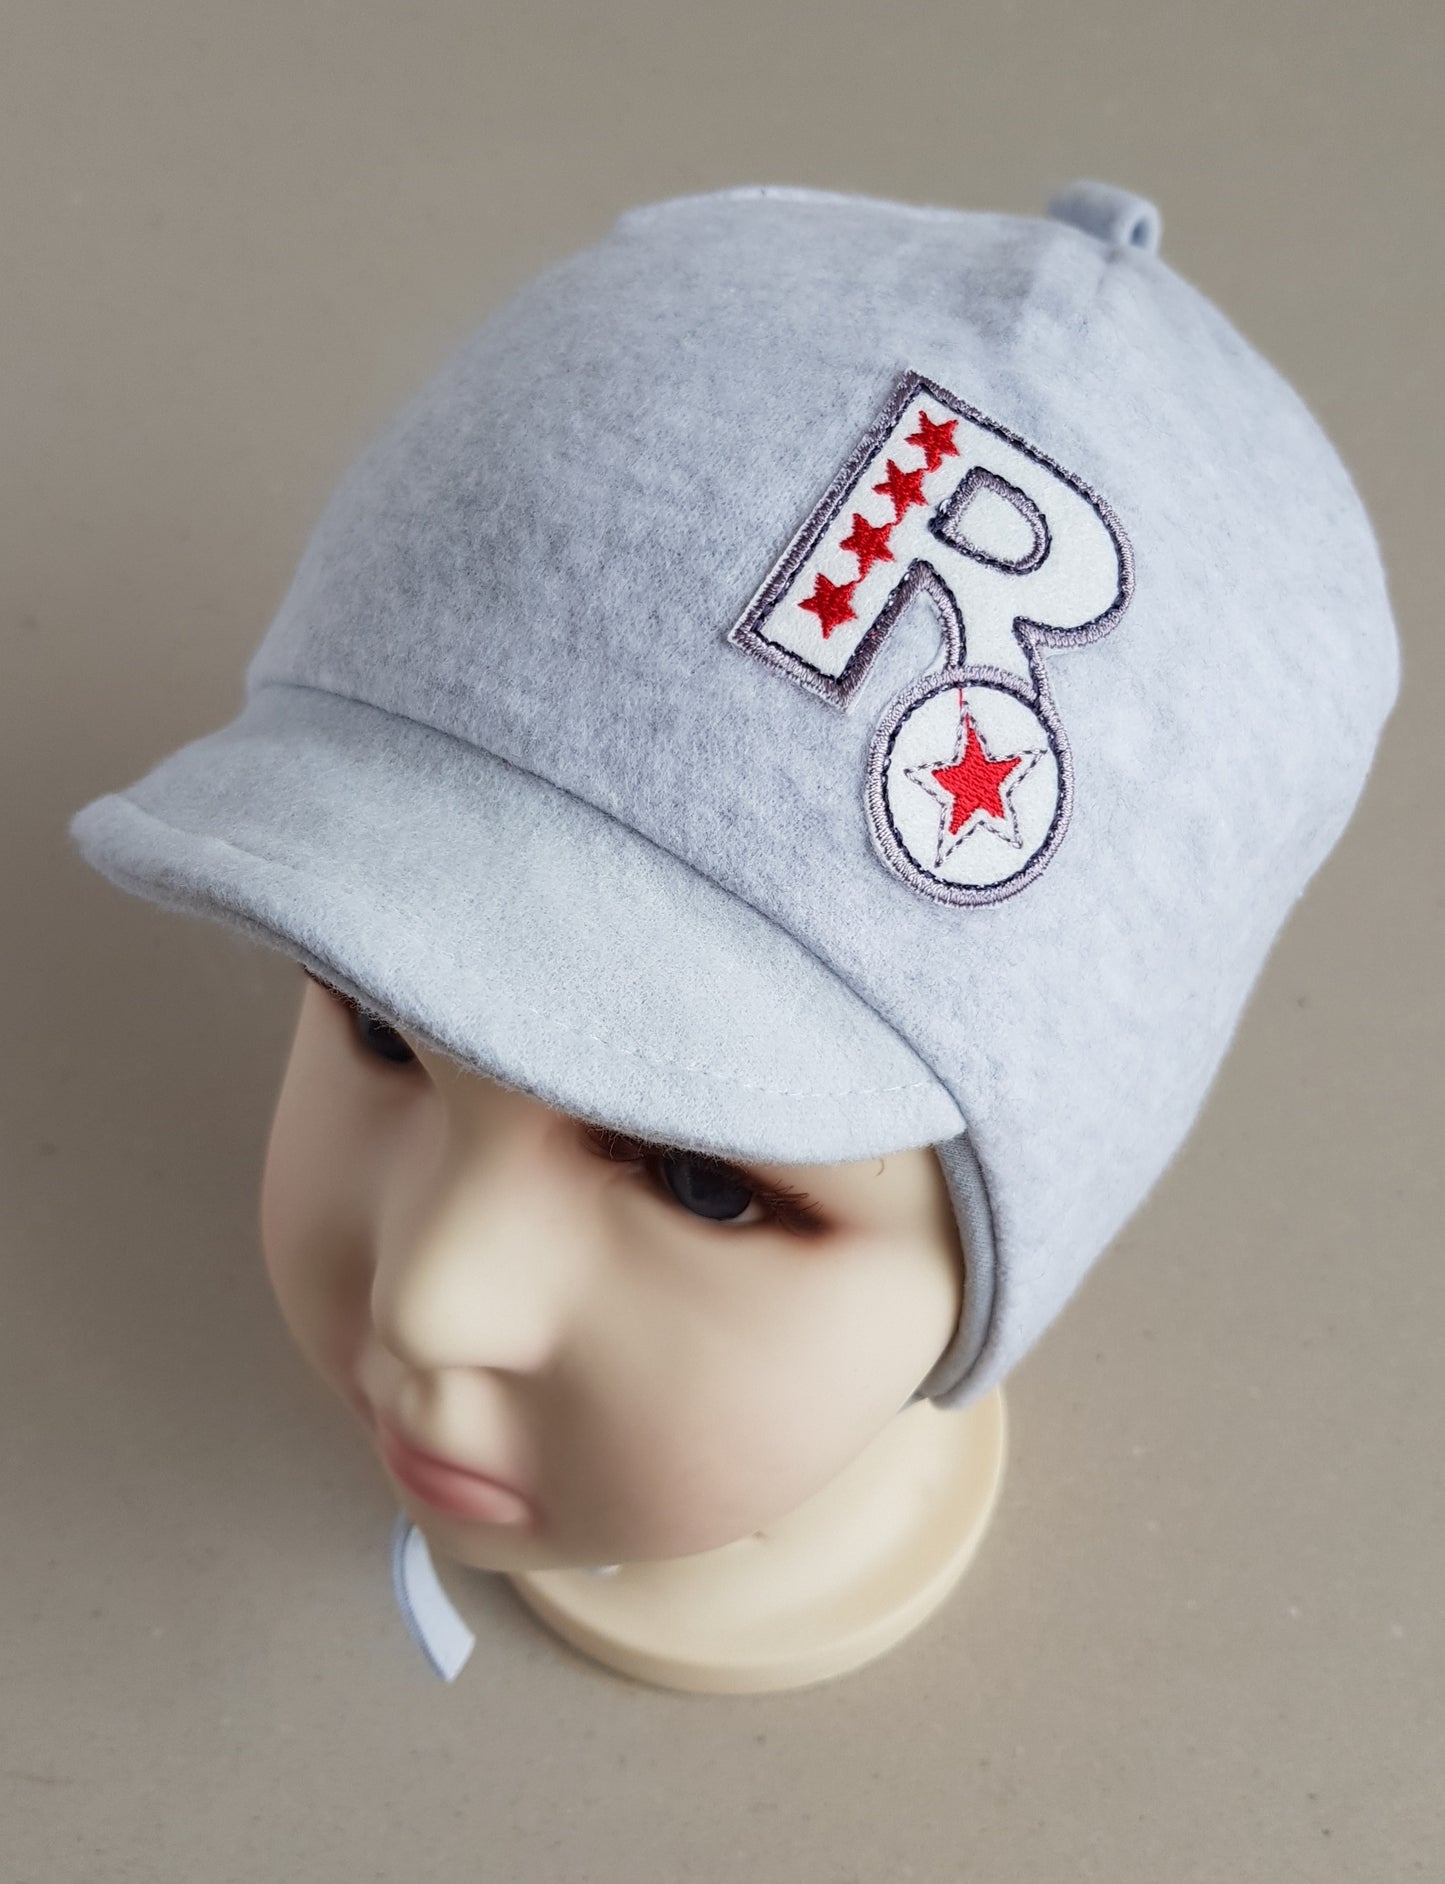 Winter hat for boys warm cap sizes  (from 6 months up to 4  years old)